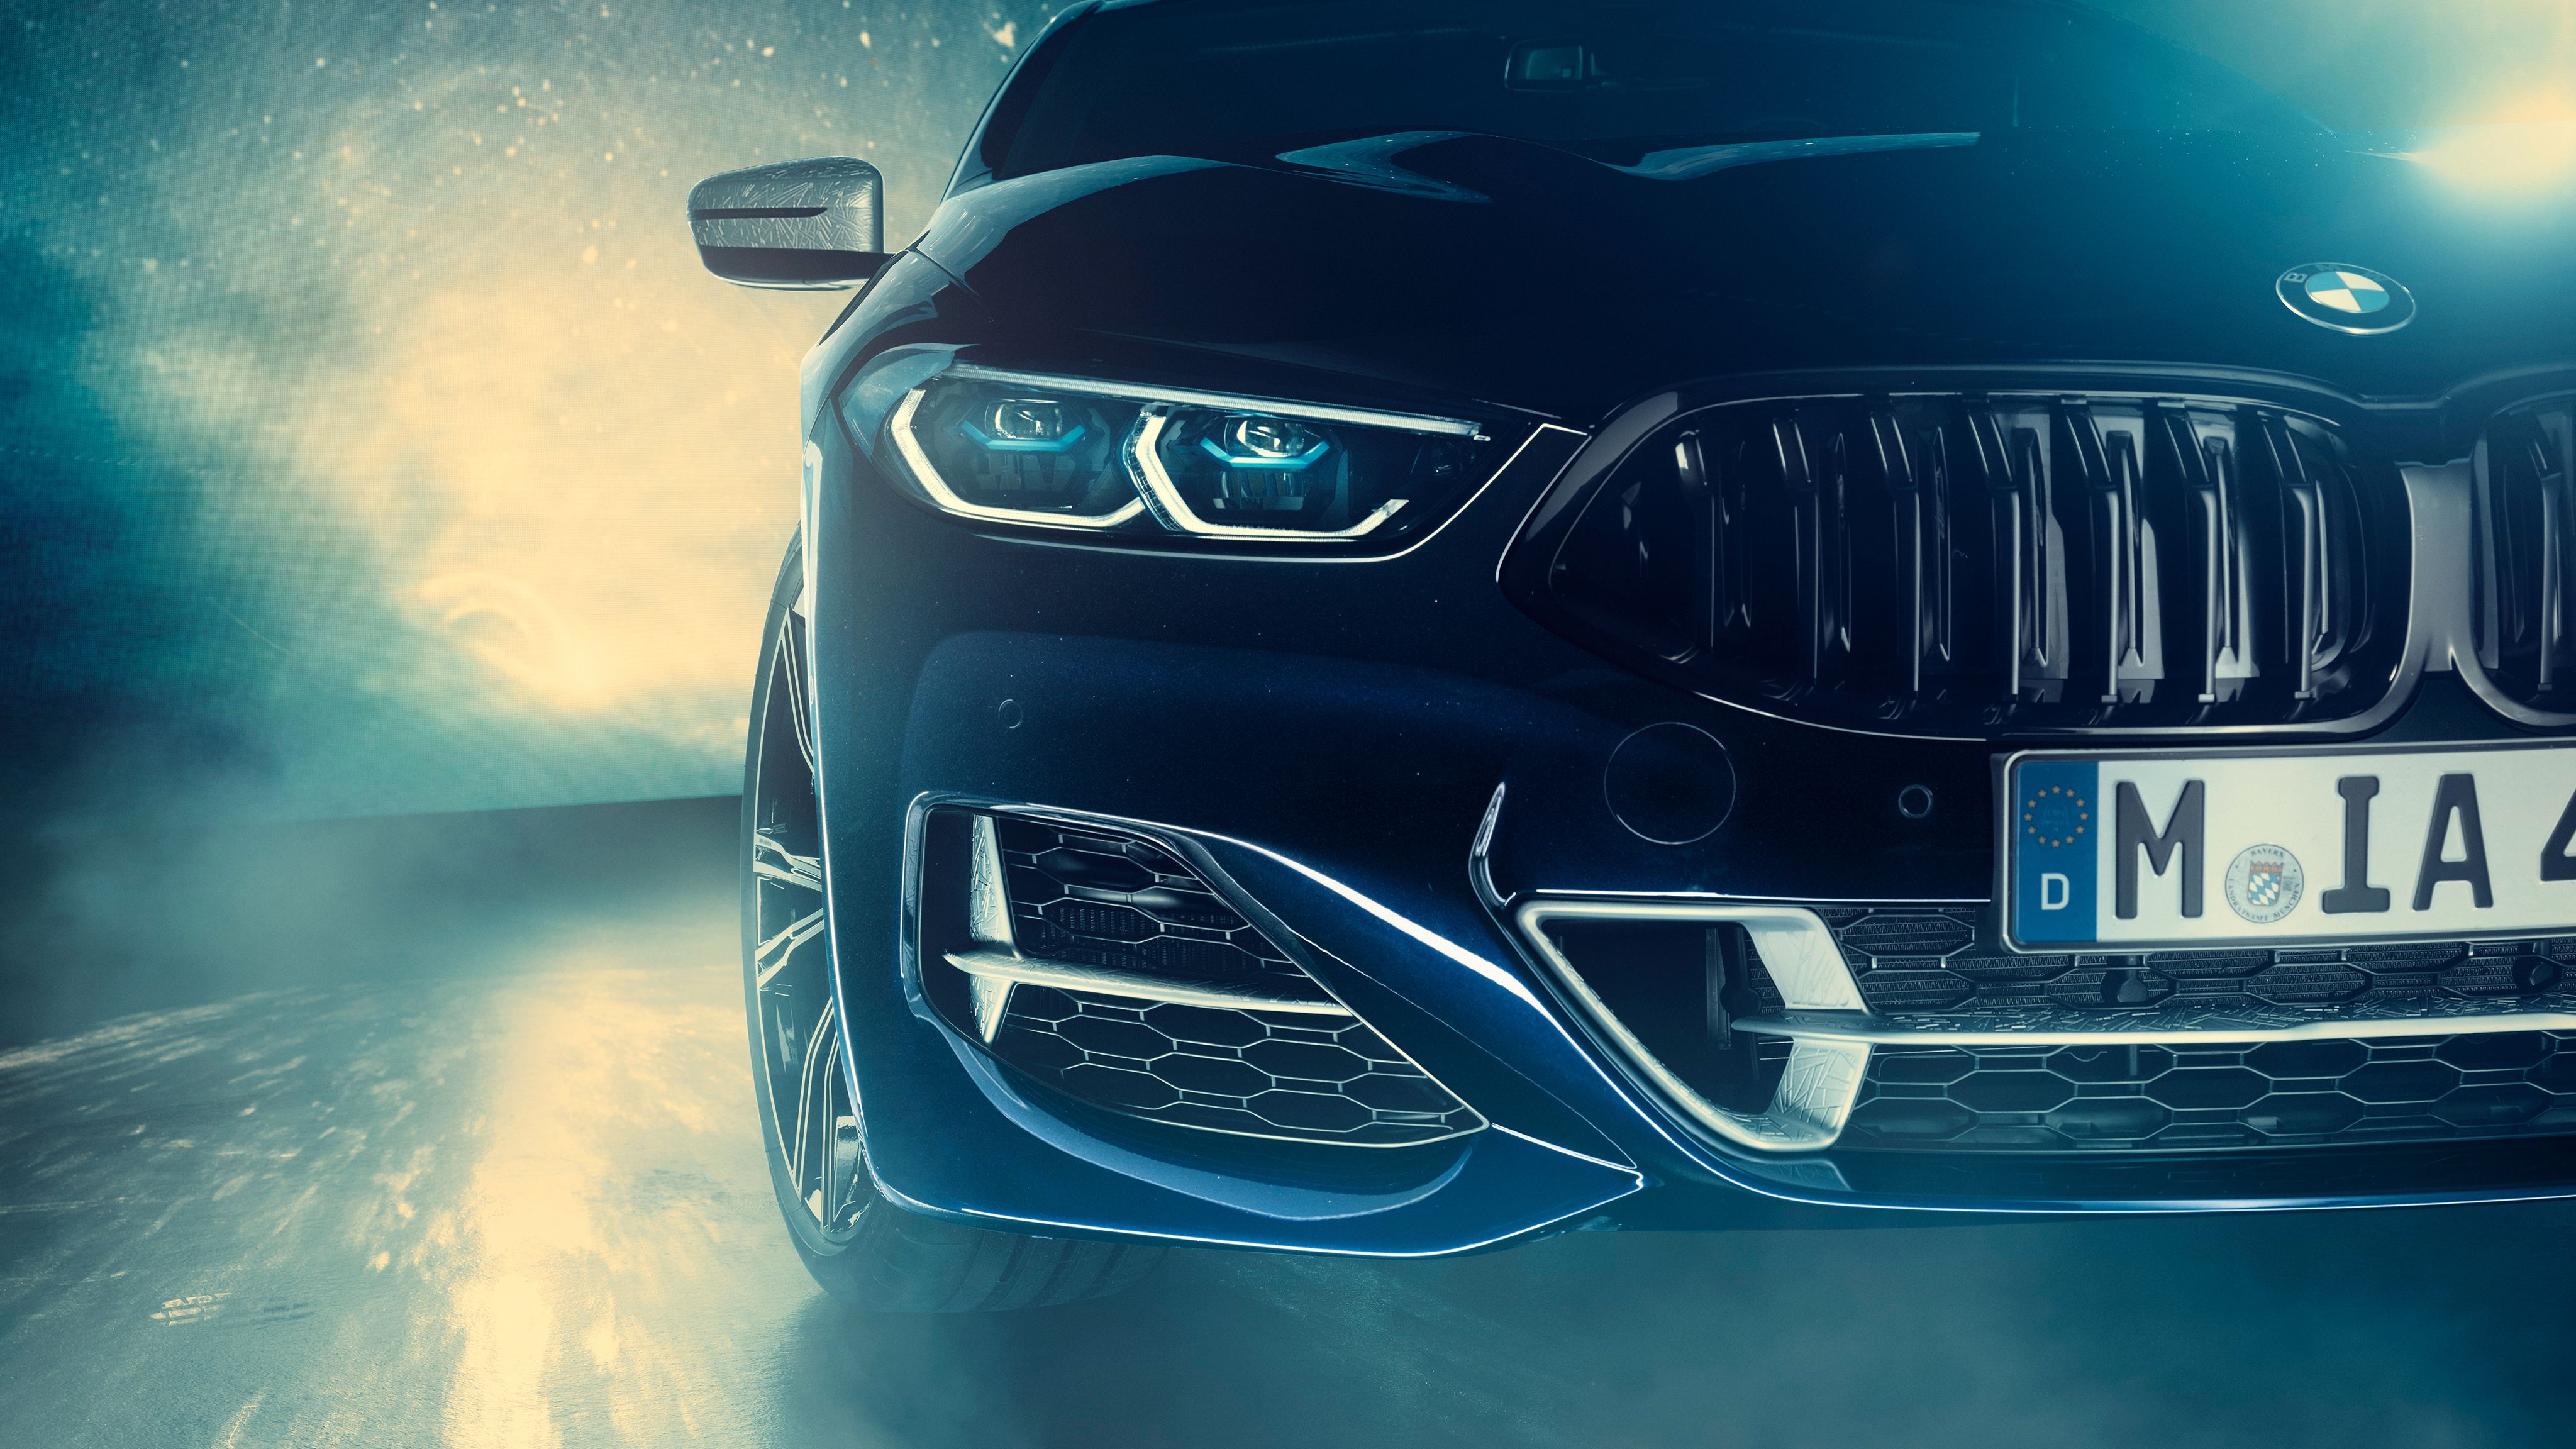 4k Cars BMW Wallpapers - Wallpaper Cave